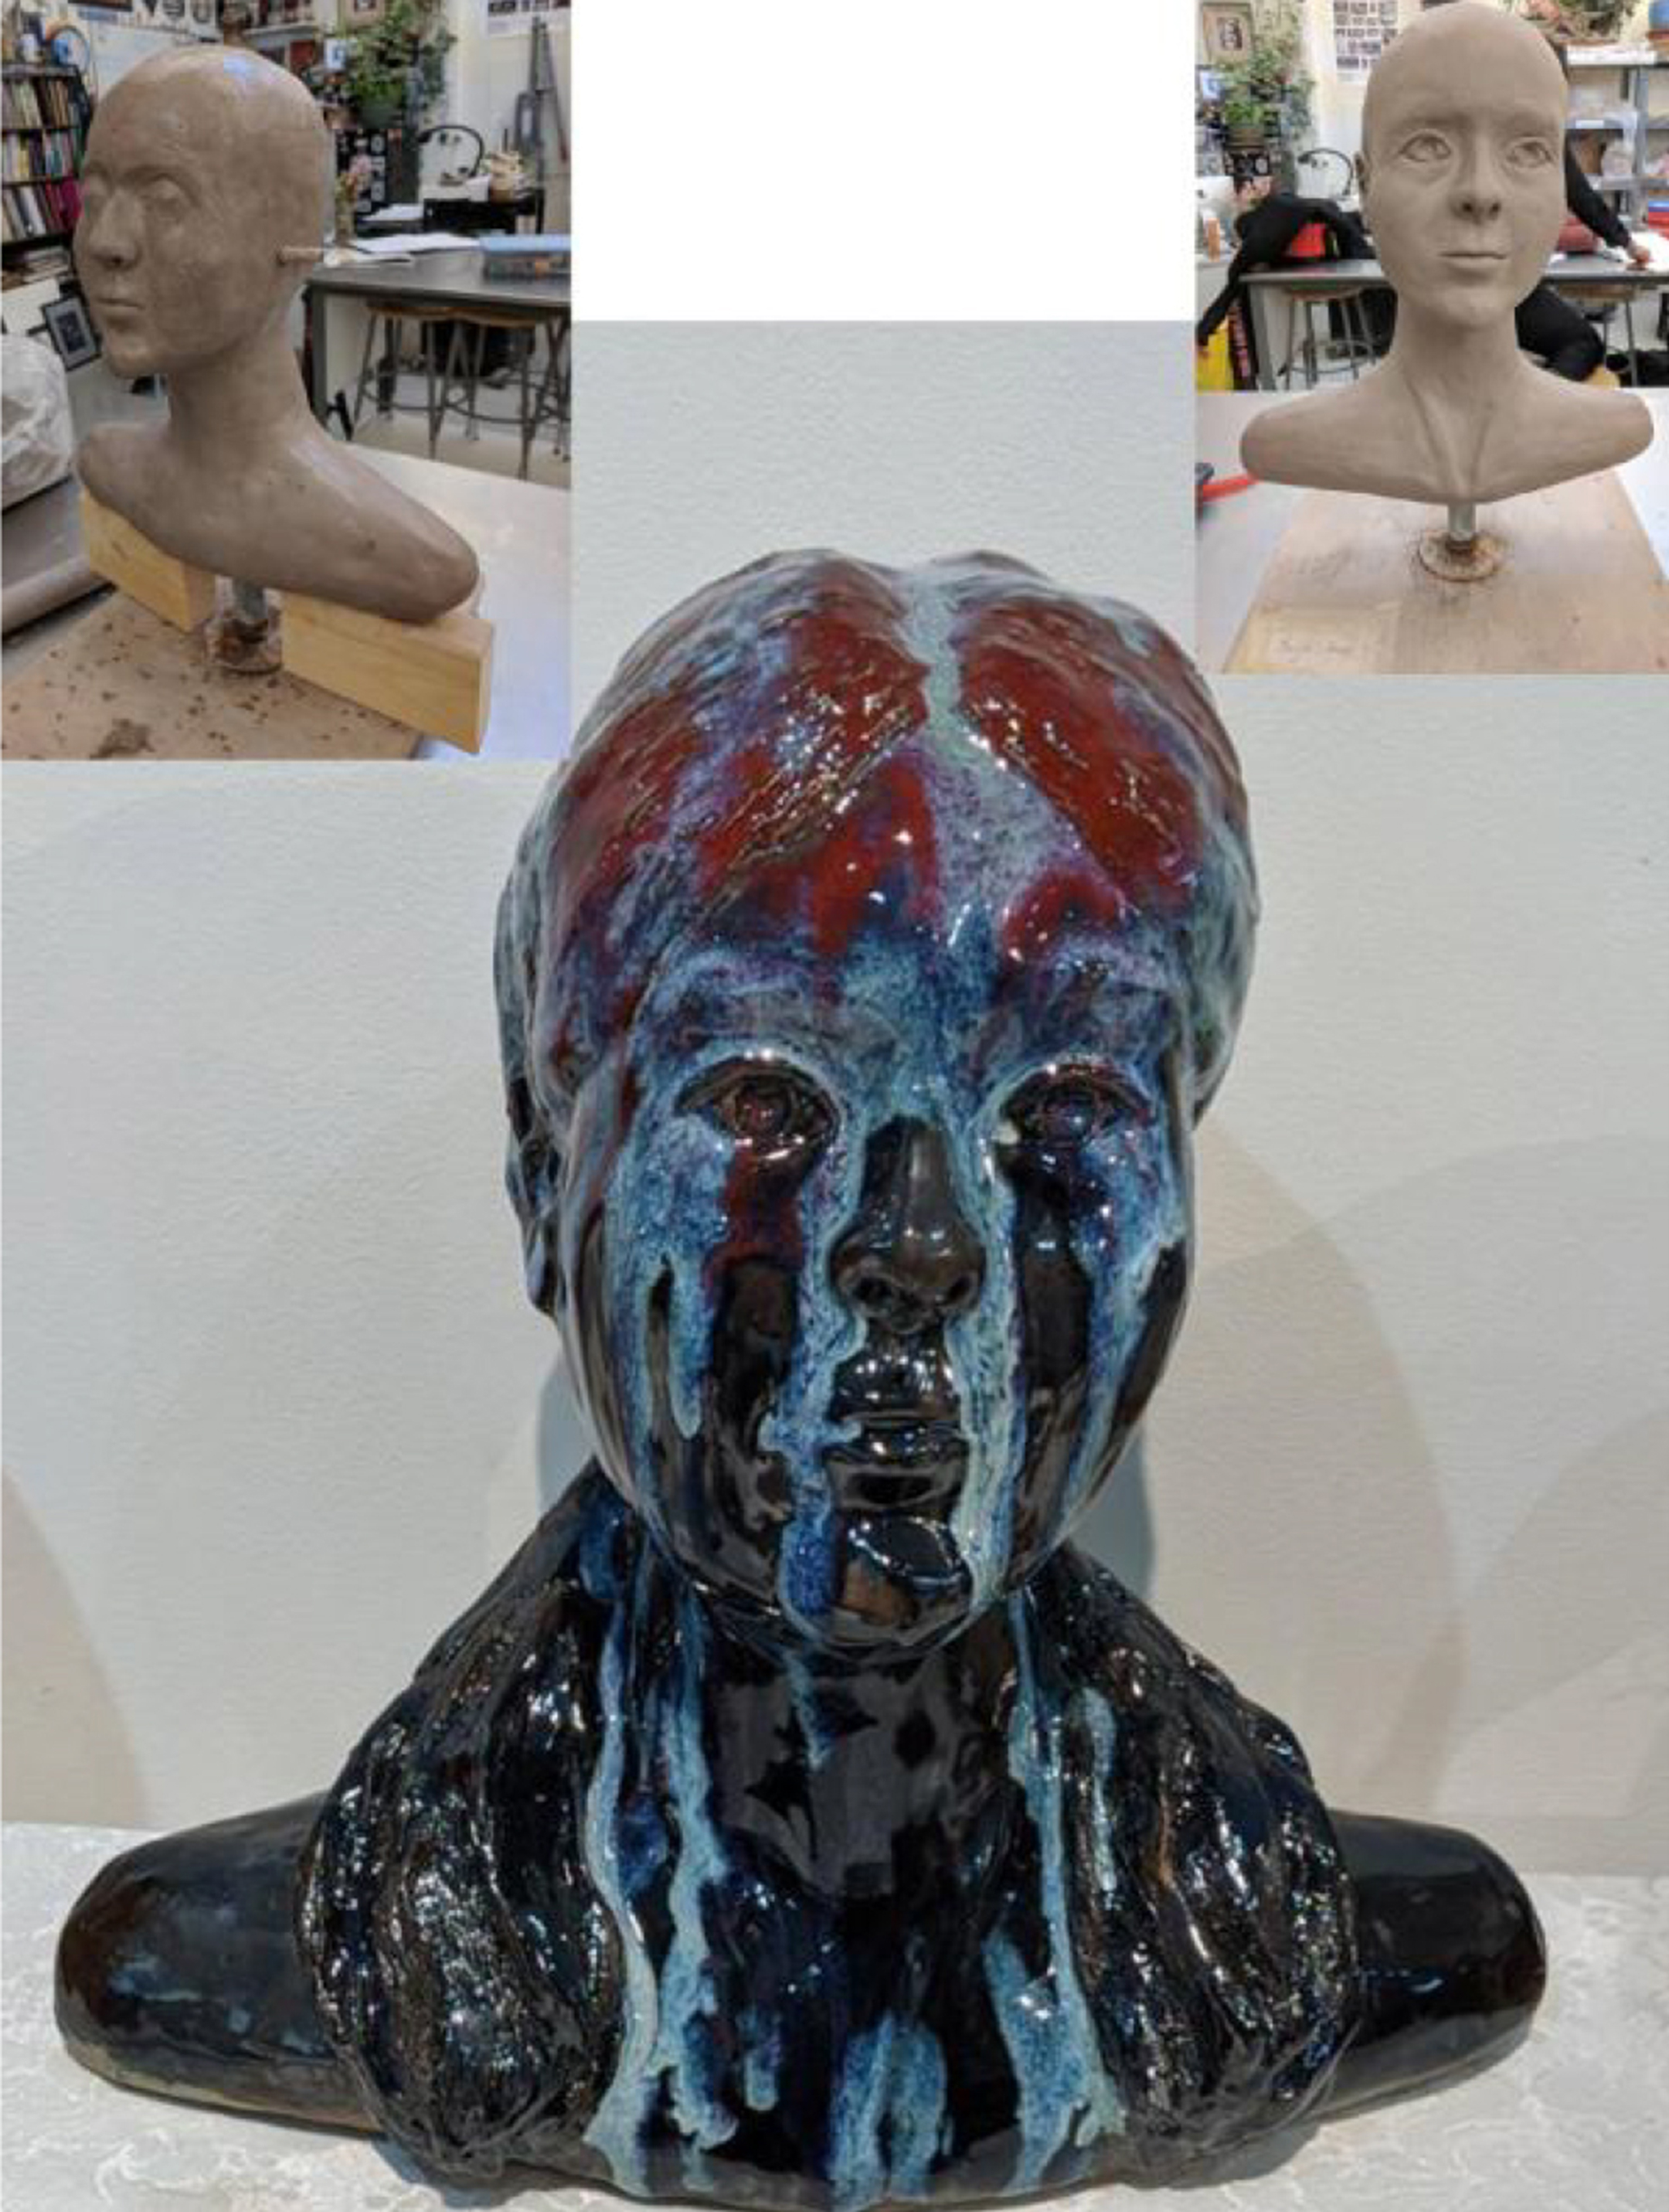 Sculpture of the artist's head, covered in a blue, black, and red glaze to simulate melting